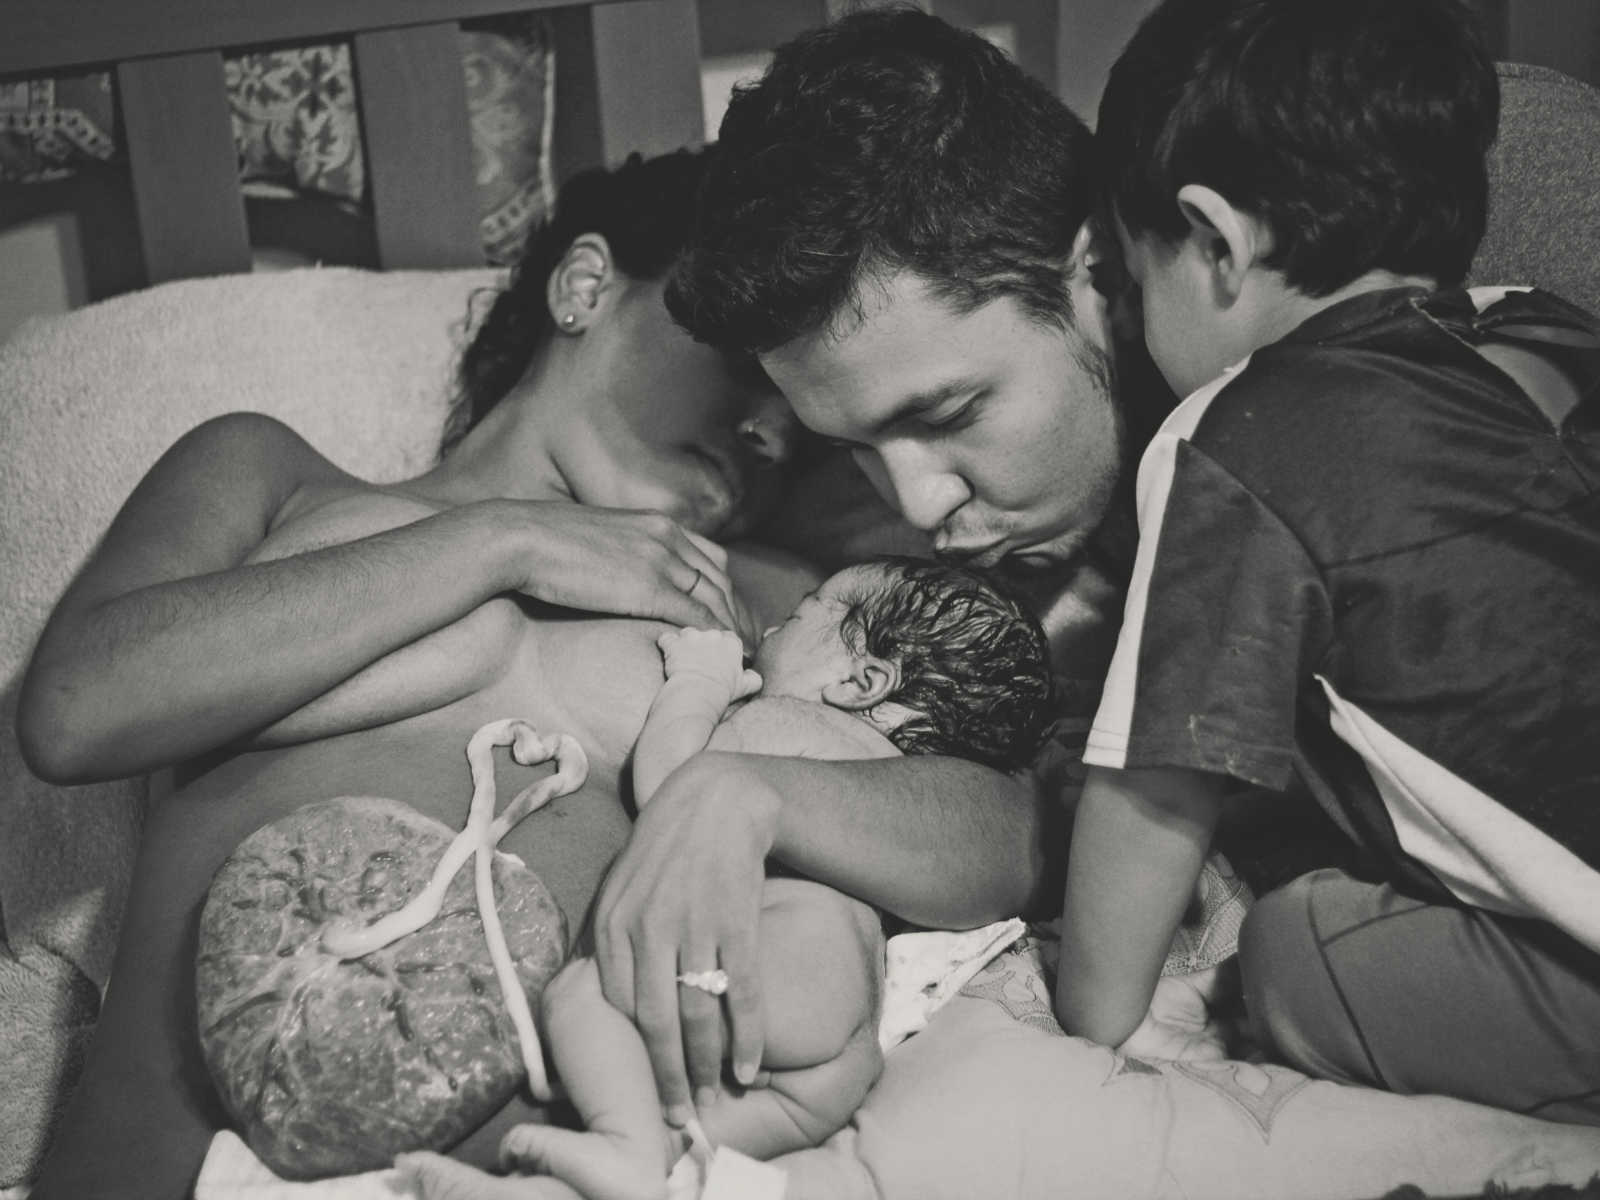 Shirtless mother who had water birth lies in bed breastfeeding while husband kisses newborn and son watches